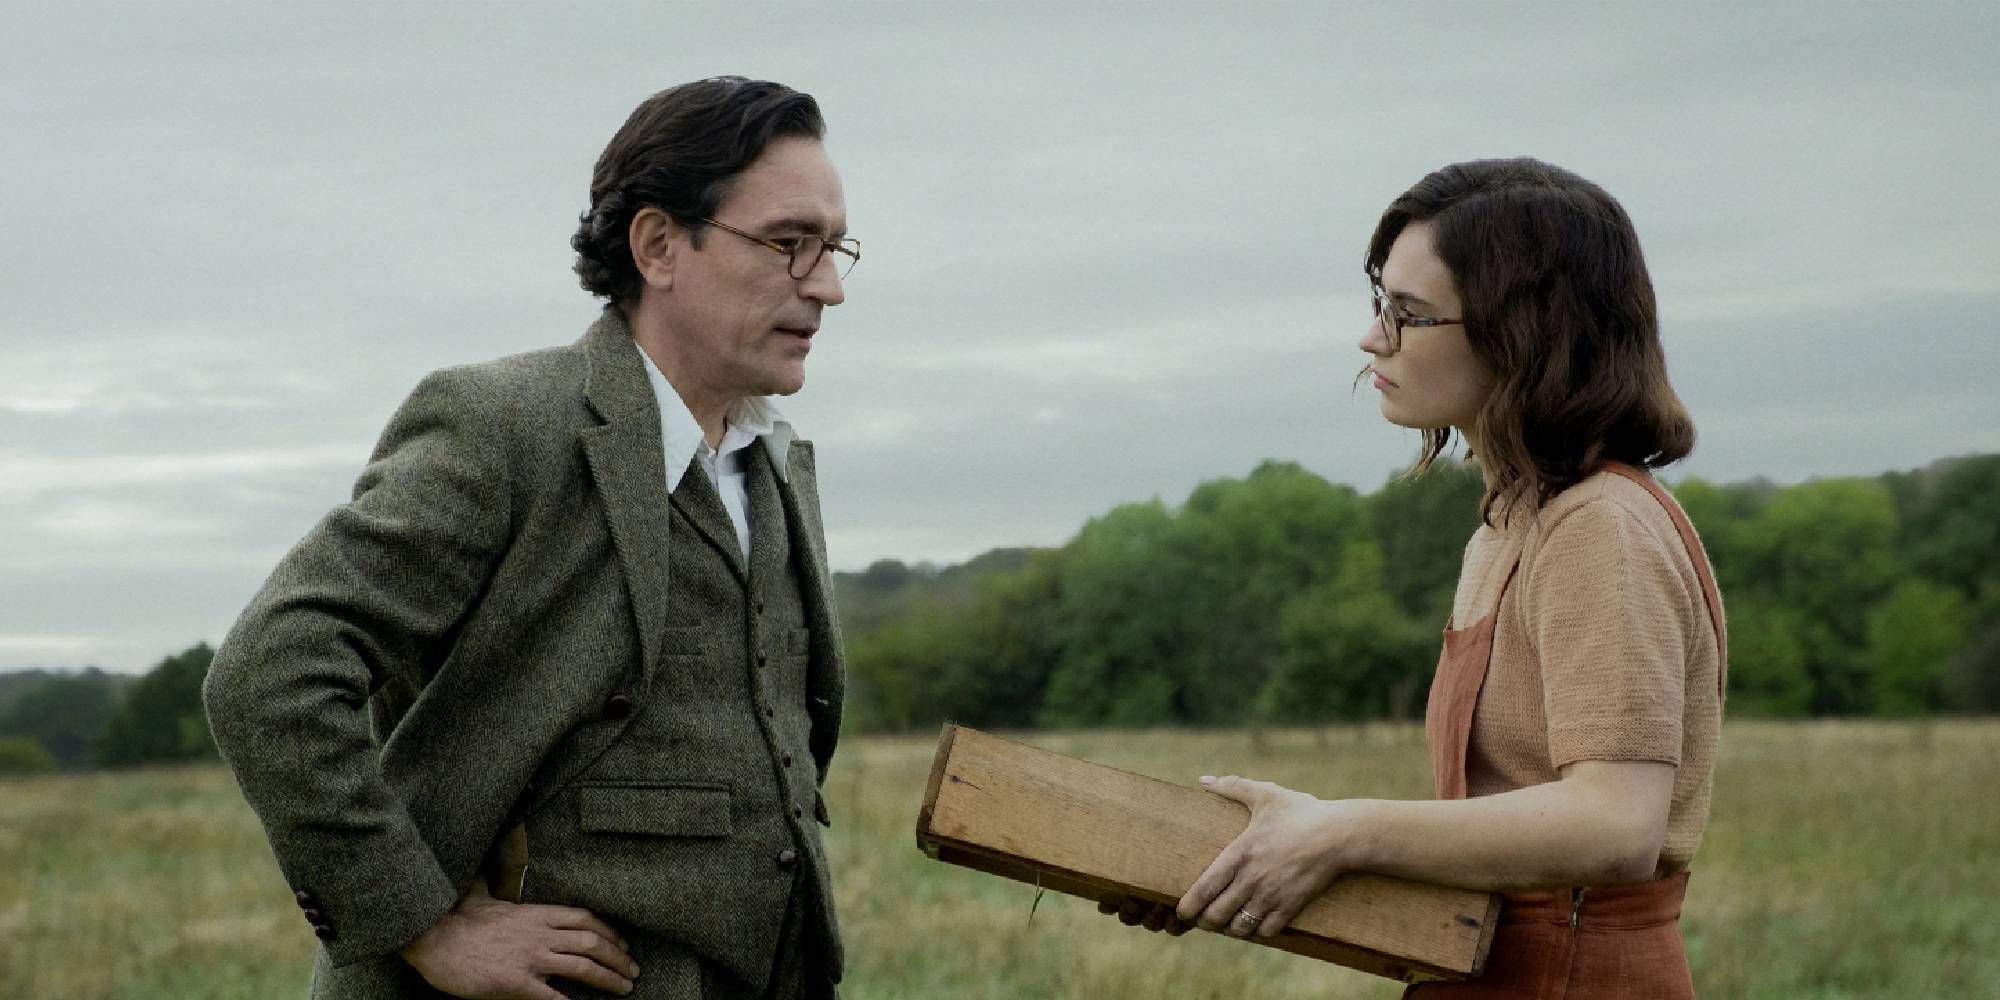 Ben Chaplin and Lily James as Stuart and Peggy Piggott, talking in a grass field in The Dig